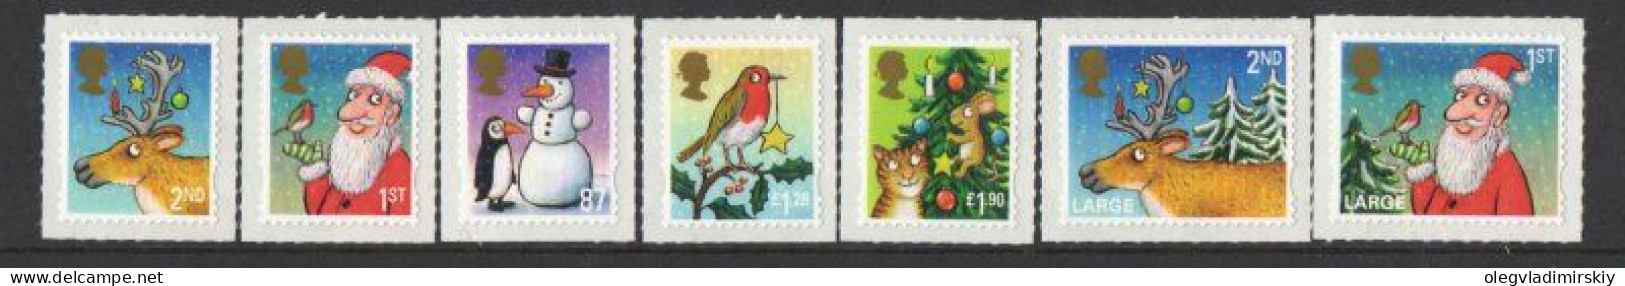 Great Britain United Kingdom 2012 Christmas Set Of 7 Self-adhesive Stamps MNH - Noël